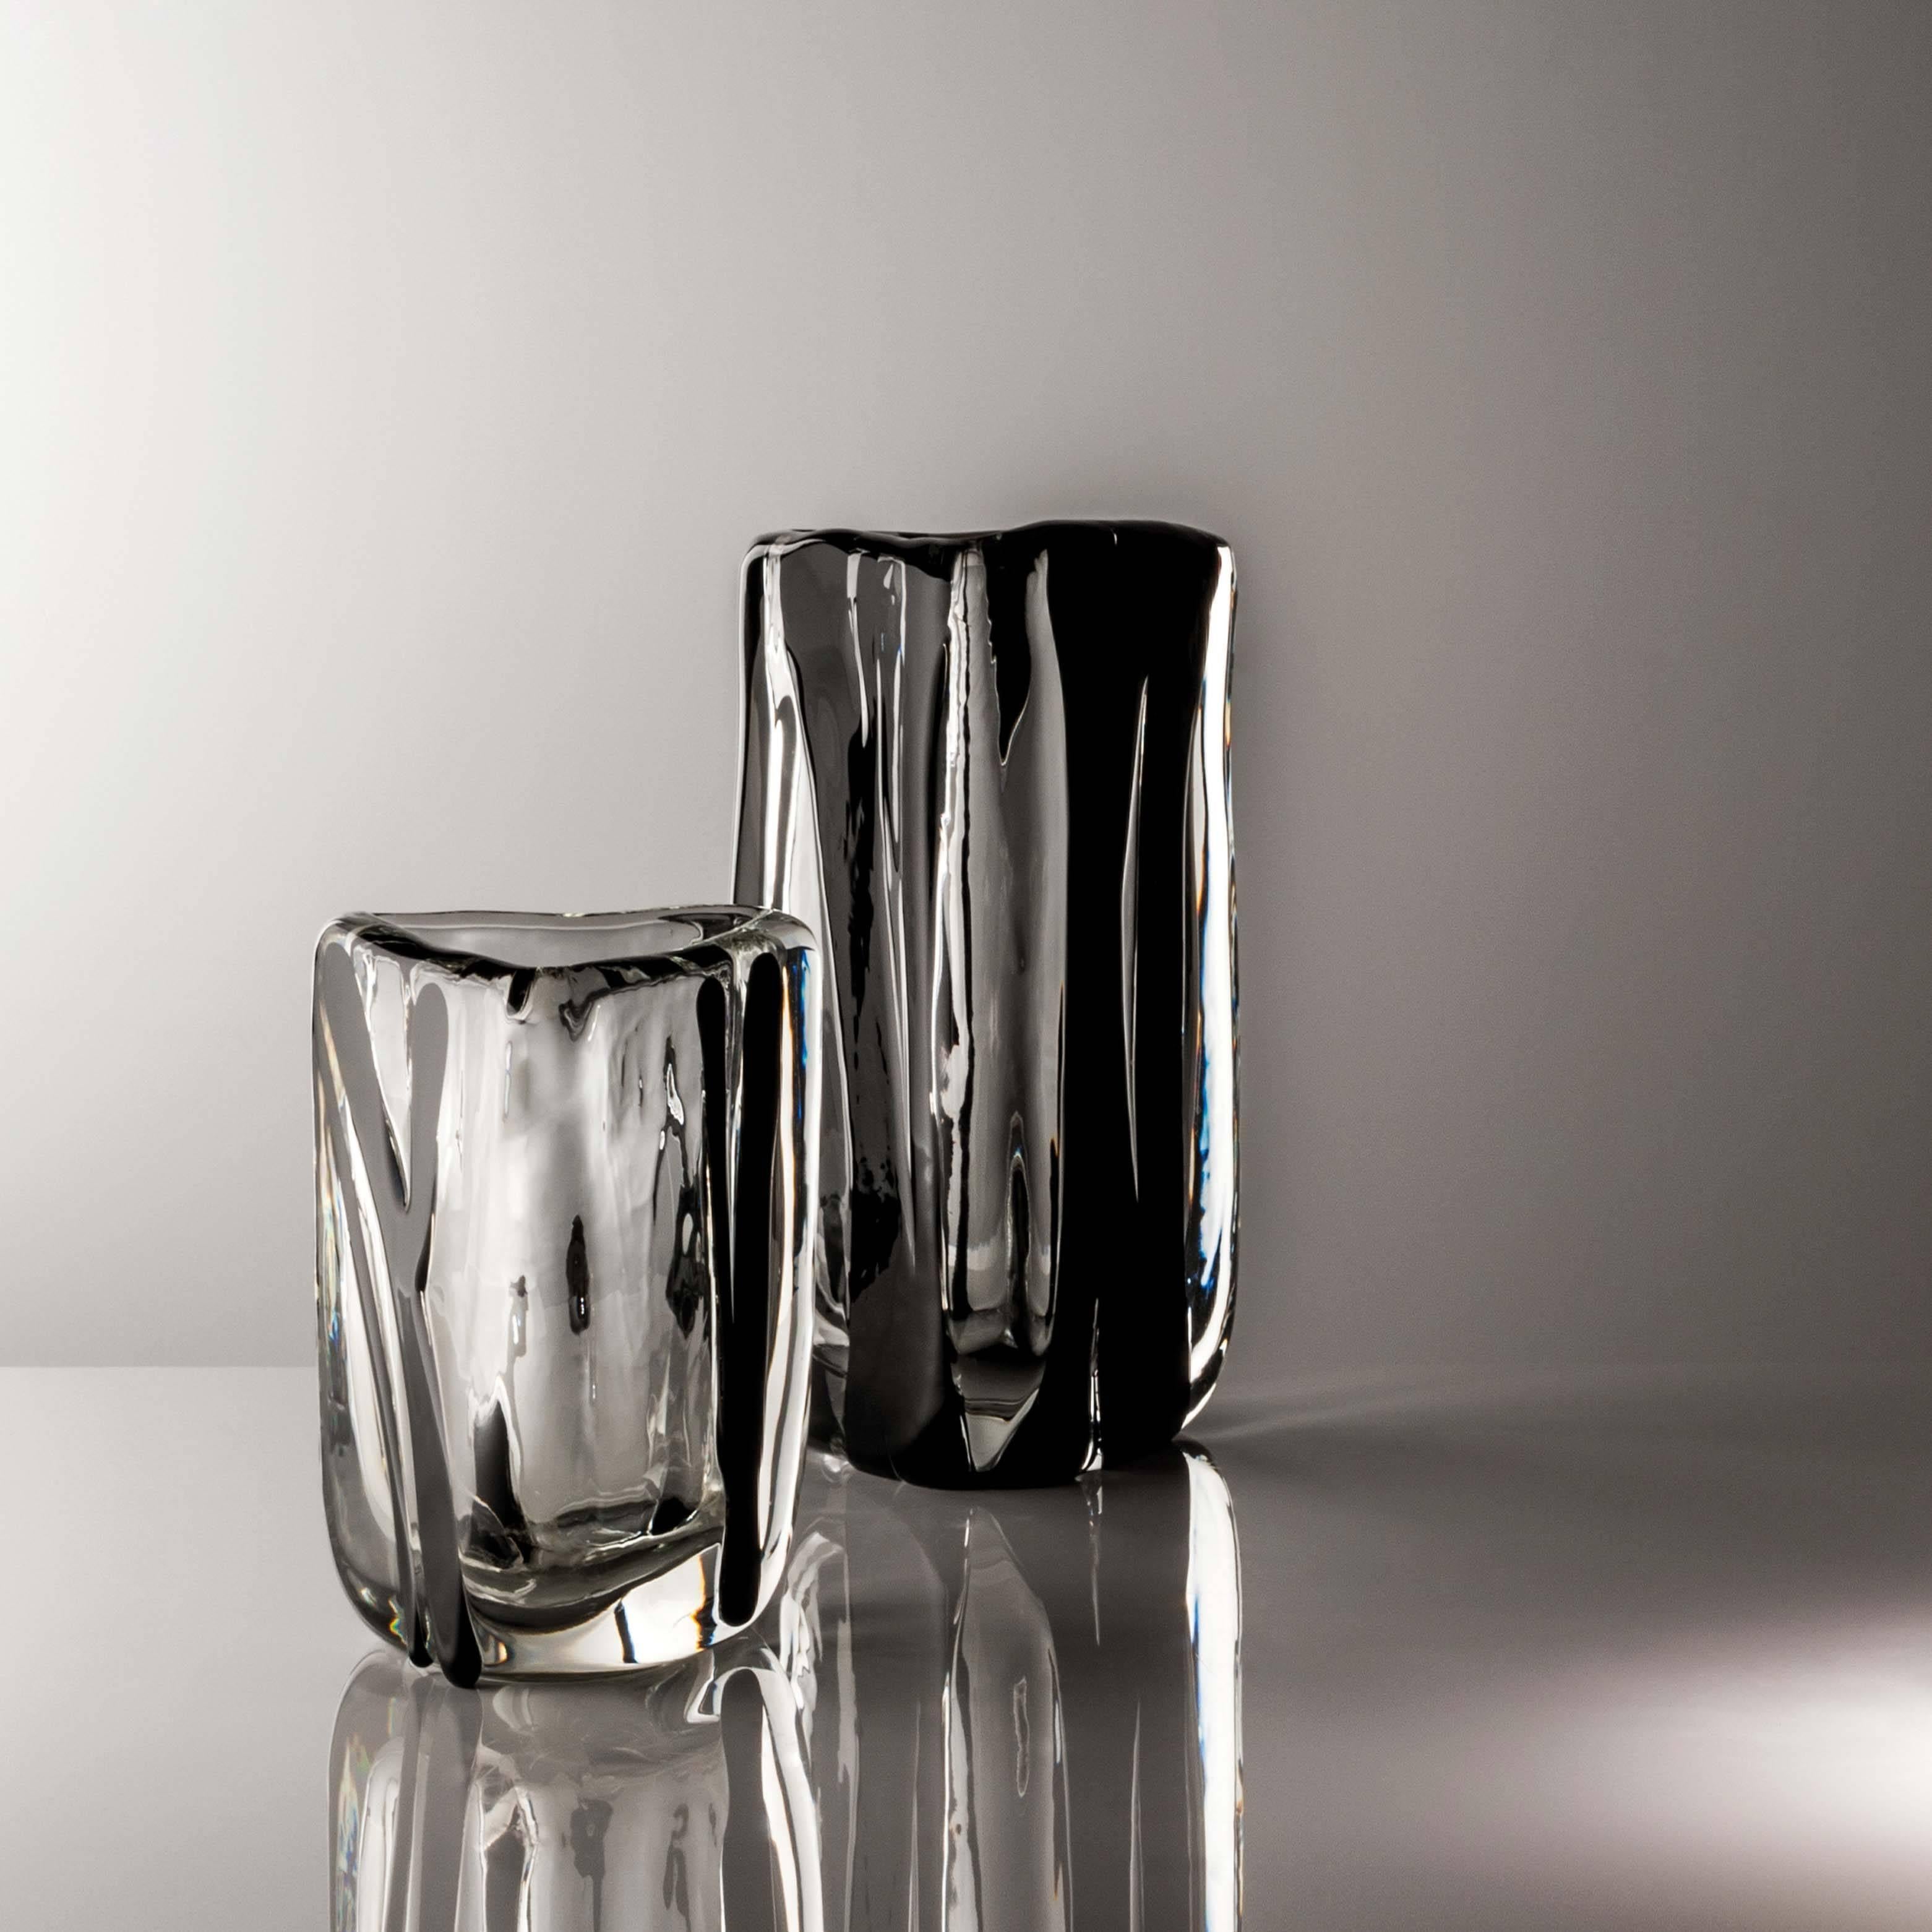 The Triangolo vase comes in three sizes and two different color-ways; the present example is the large size with crystal and black decoration. 

This collection evolved from the architect's interest in the power of light and materiality. Subtle